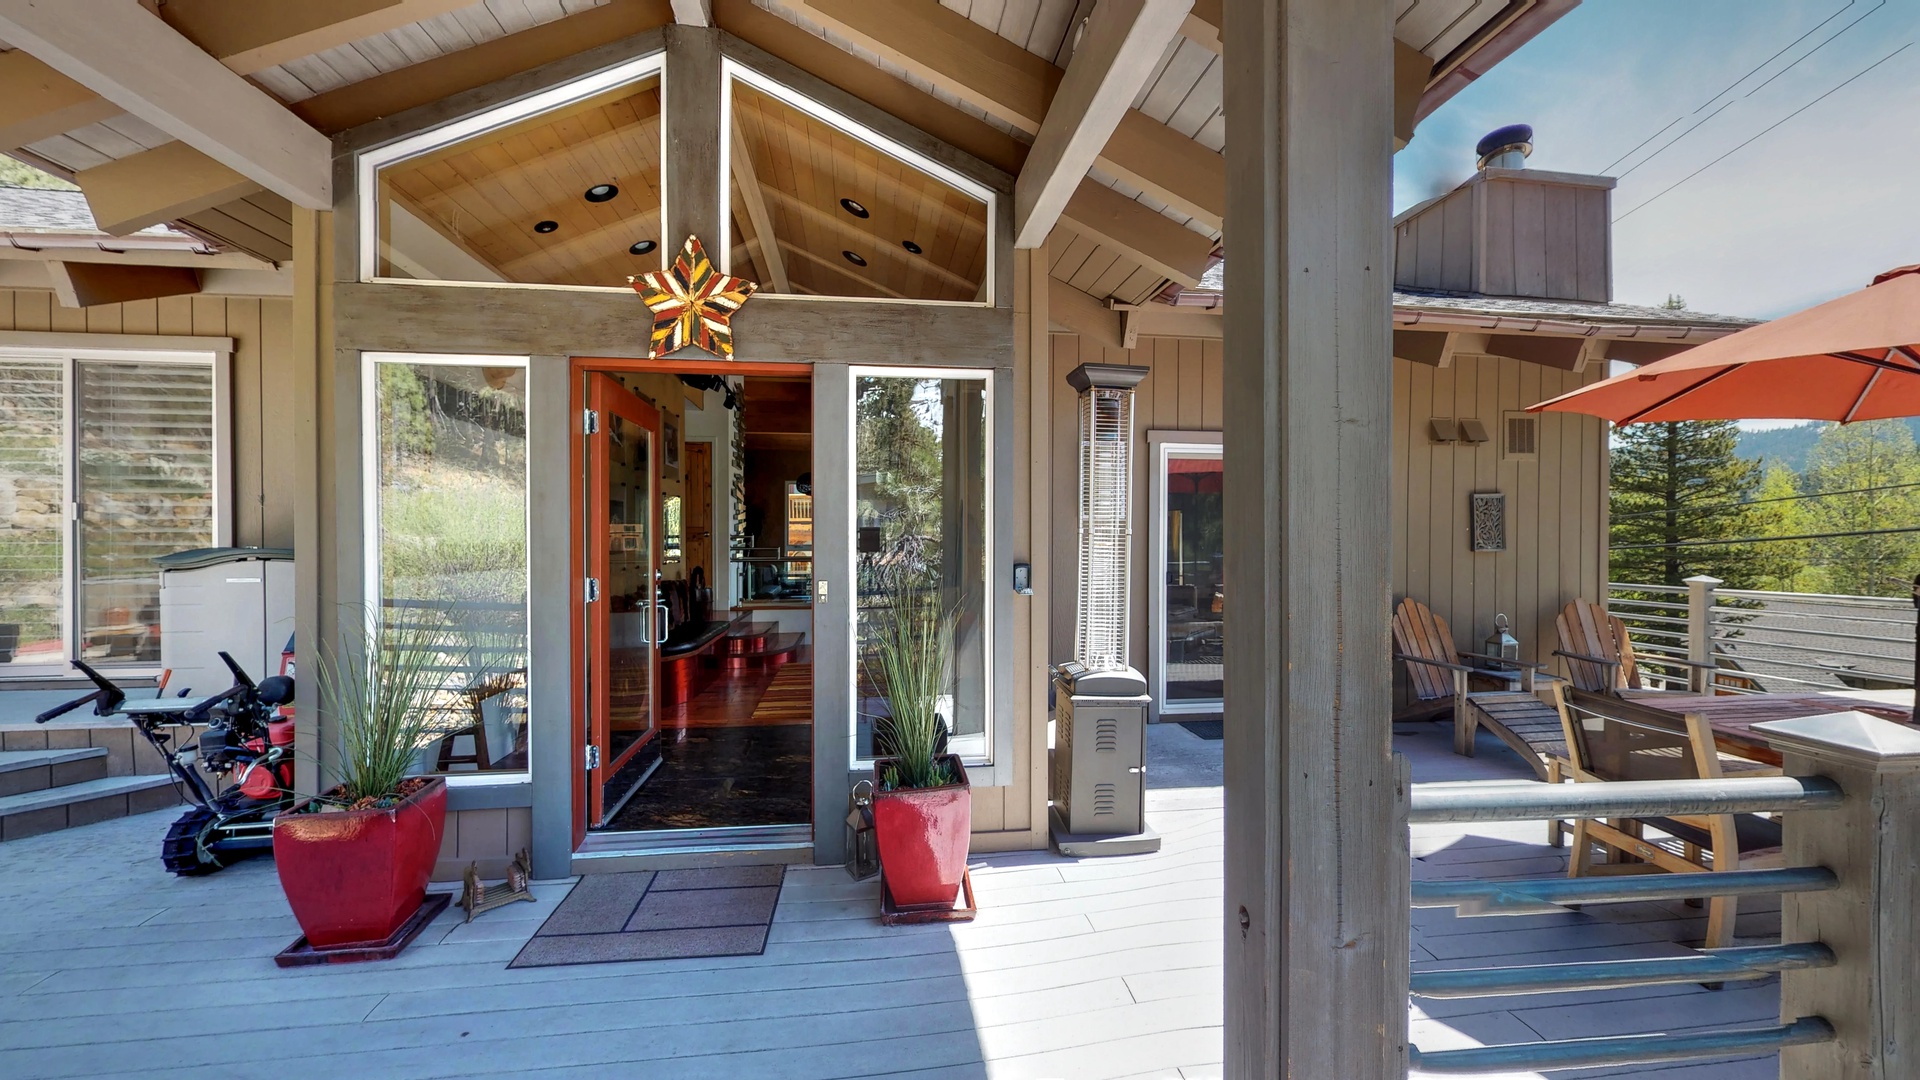 Patio and seating areas at this squaw valley rental: Eagle's Nest Lodge